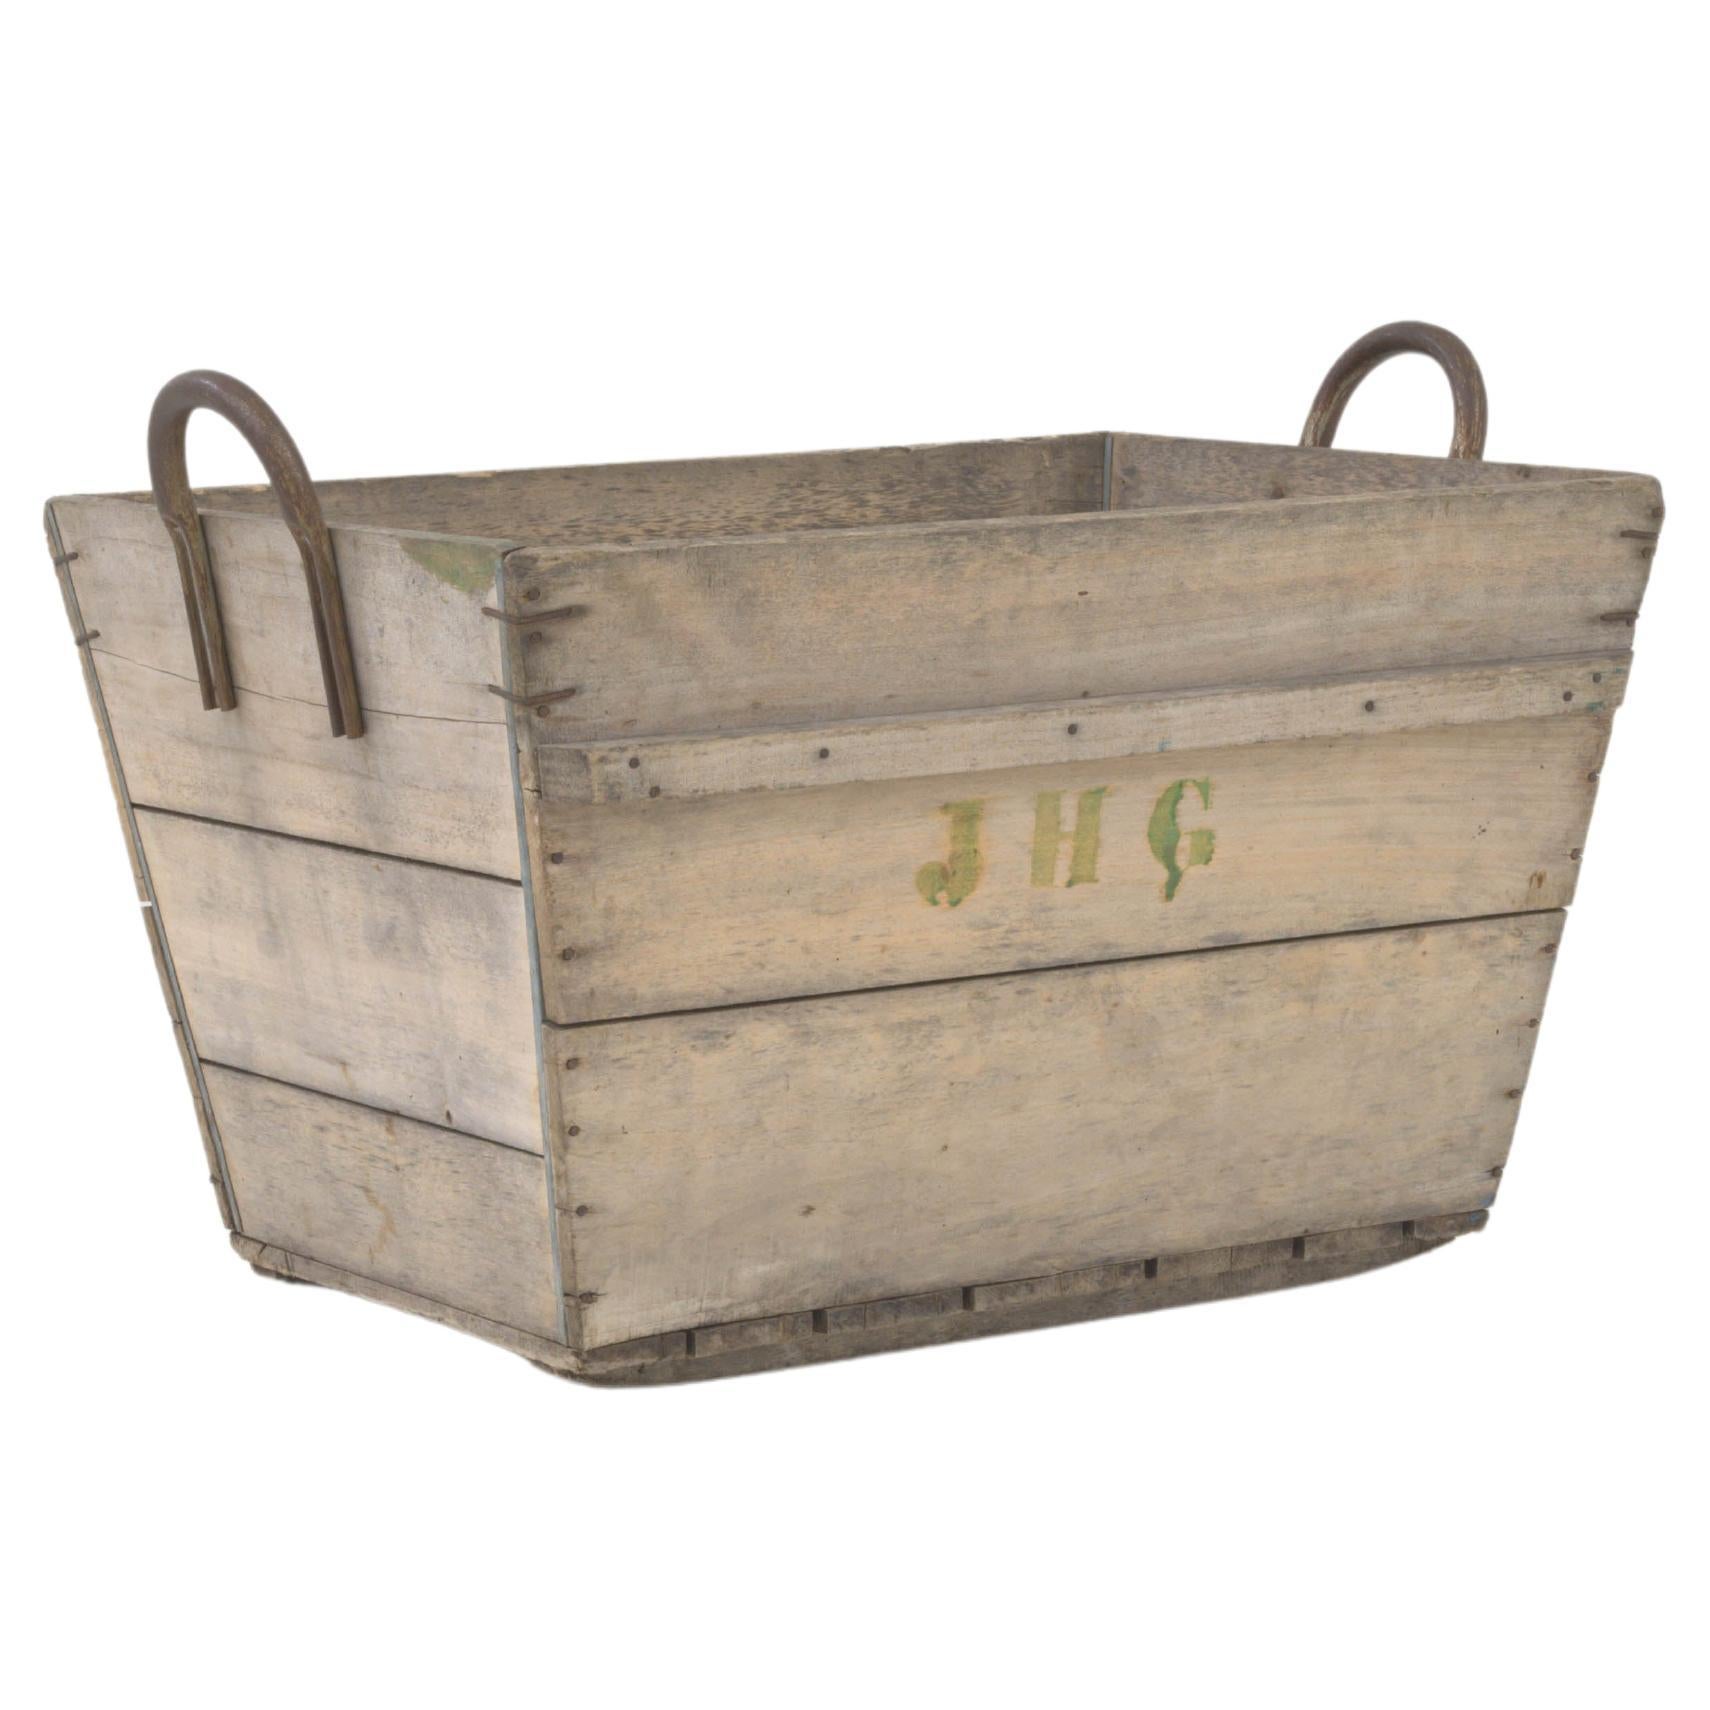 Early 20th Century French Wooden Grape Crate